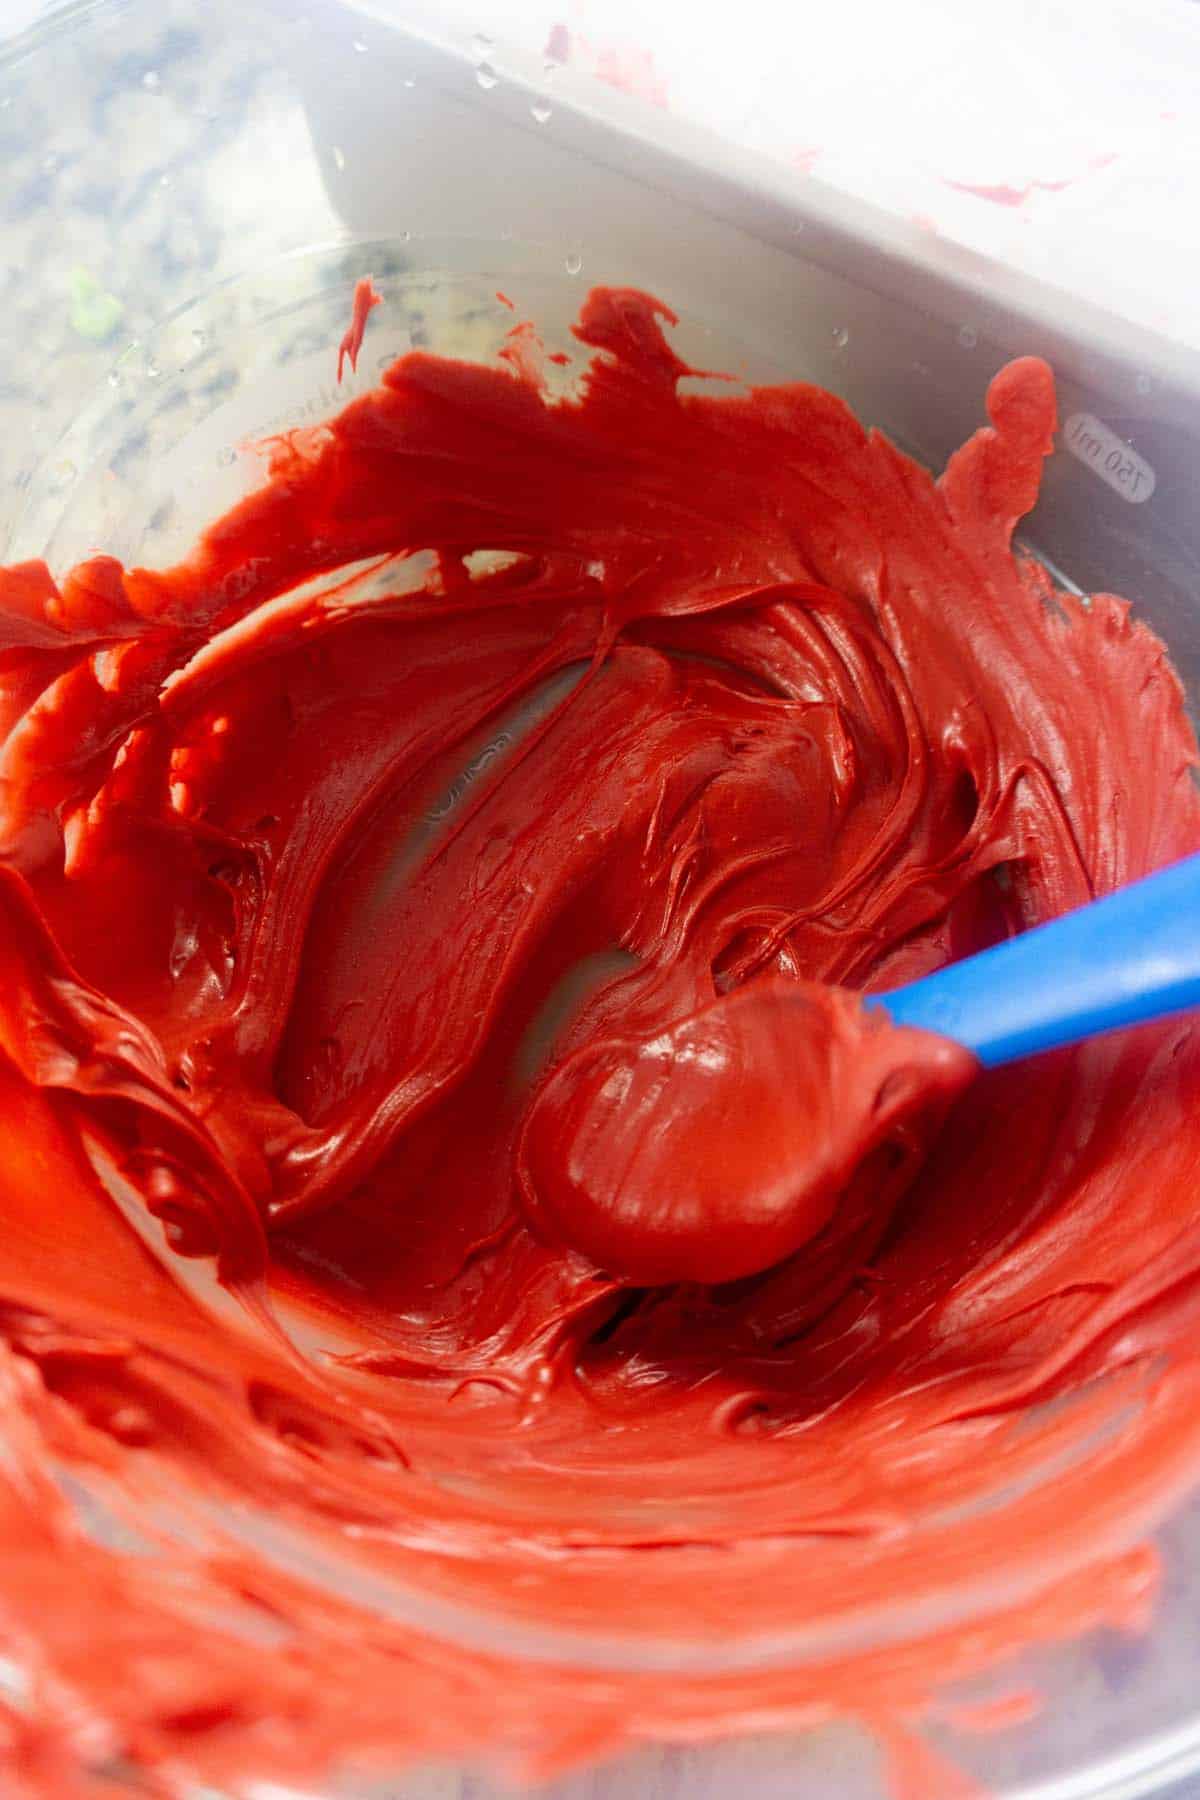 Red candy melts melted in a mixing bowl.